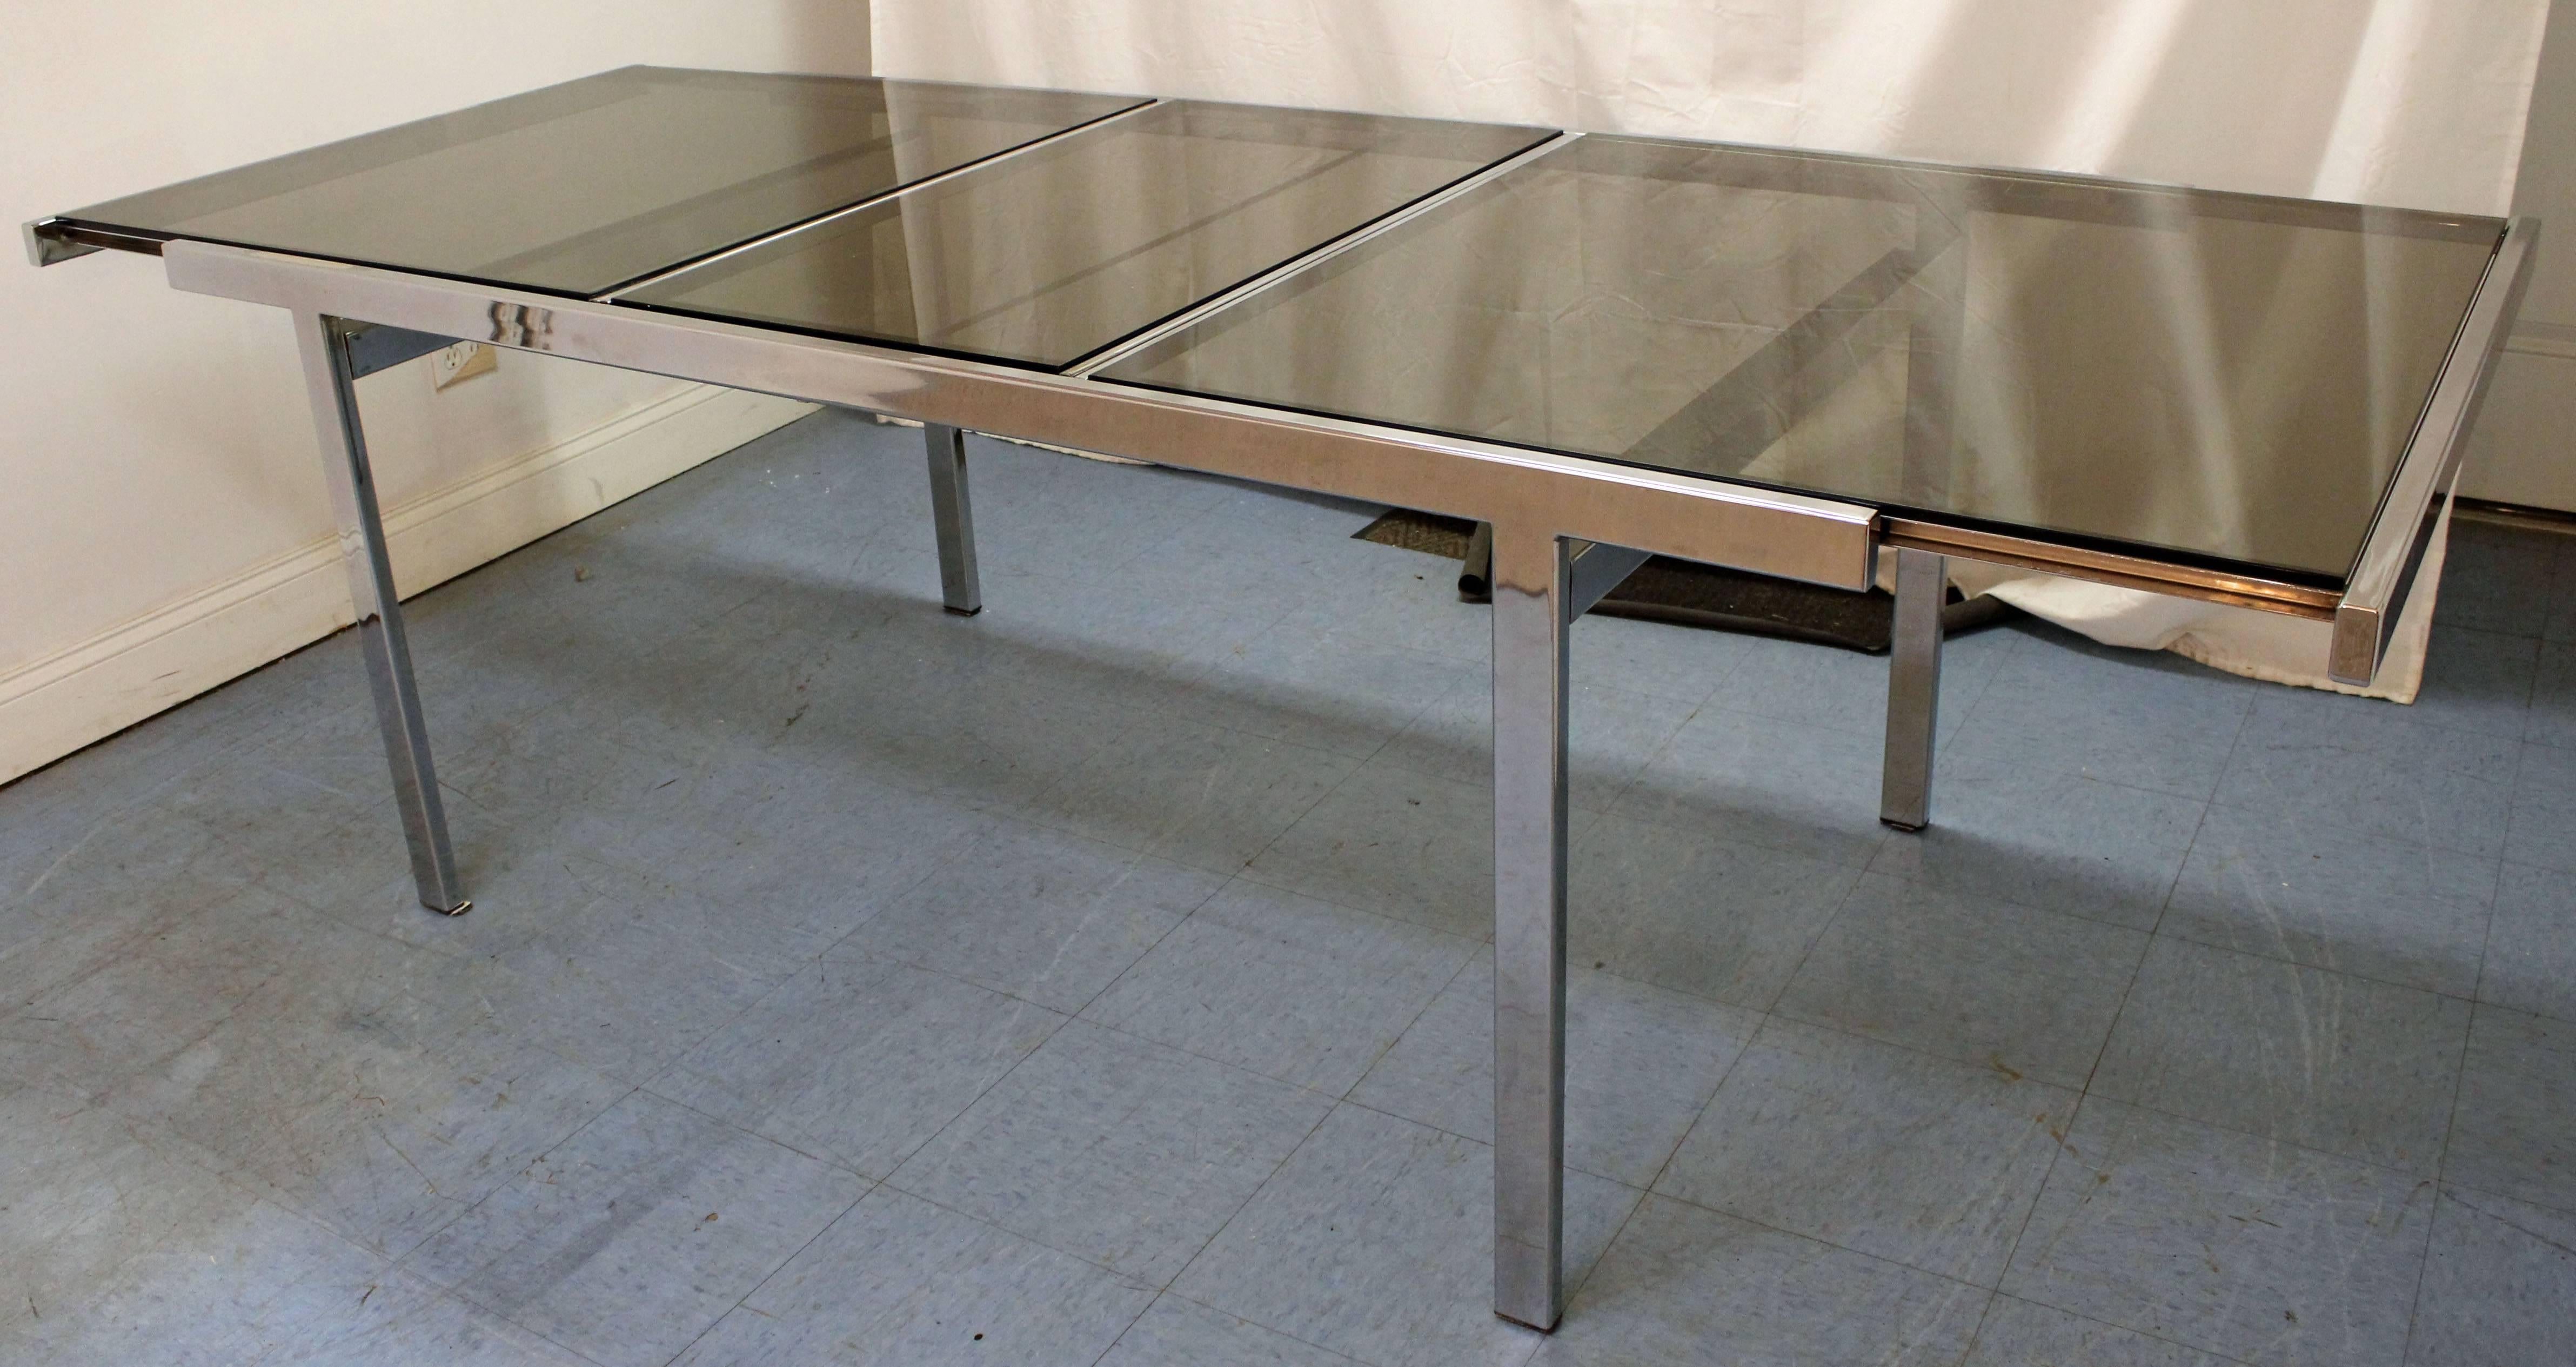 Offered is an extendable chrome dining table, designed by Milo Baughman for Design Institute of America. It is made of chrome with a glass top and features a hidden table leaf that is stored inside the table. See our other listings for a matching